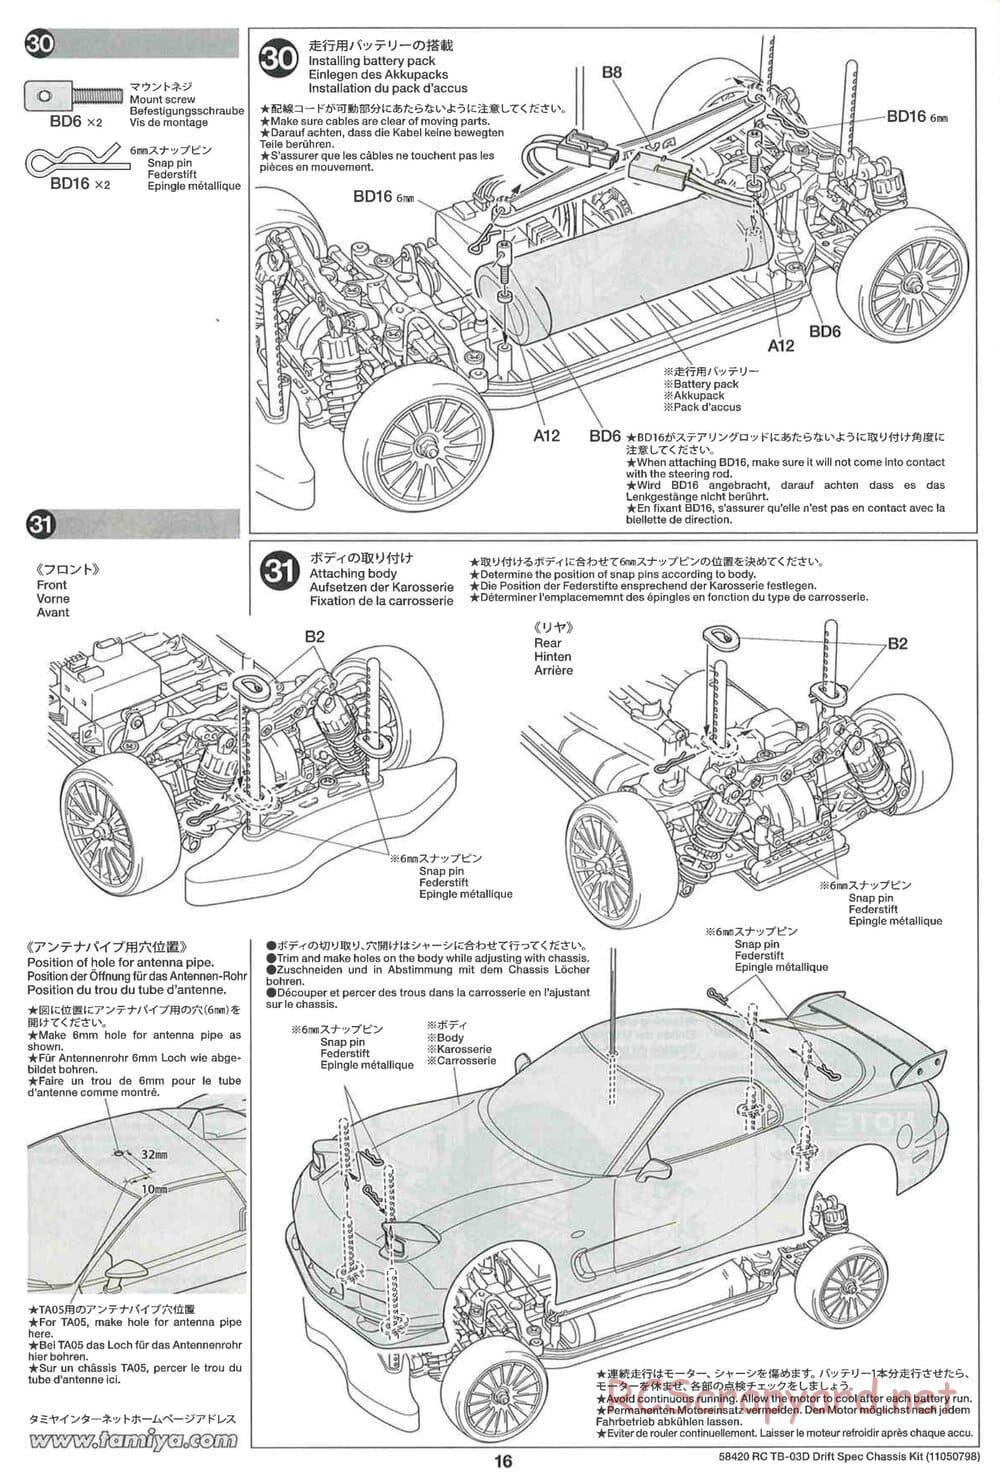 Tamiya - TB-03D HP Drift Spec Chassis - Manual - Page 16